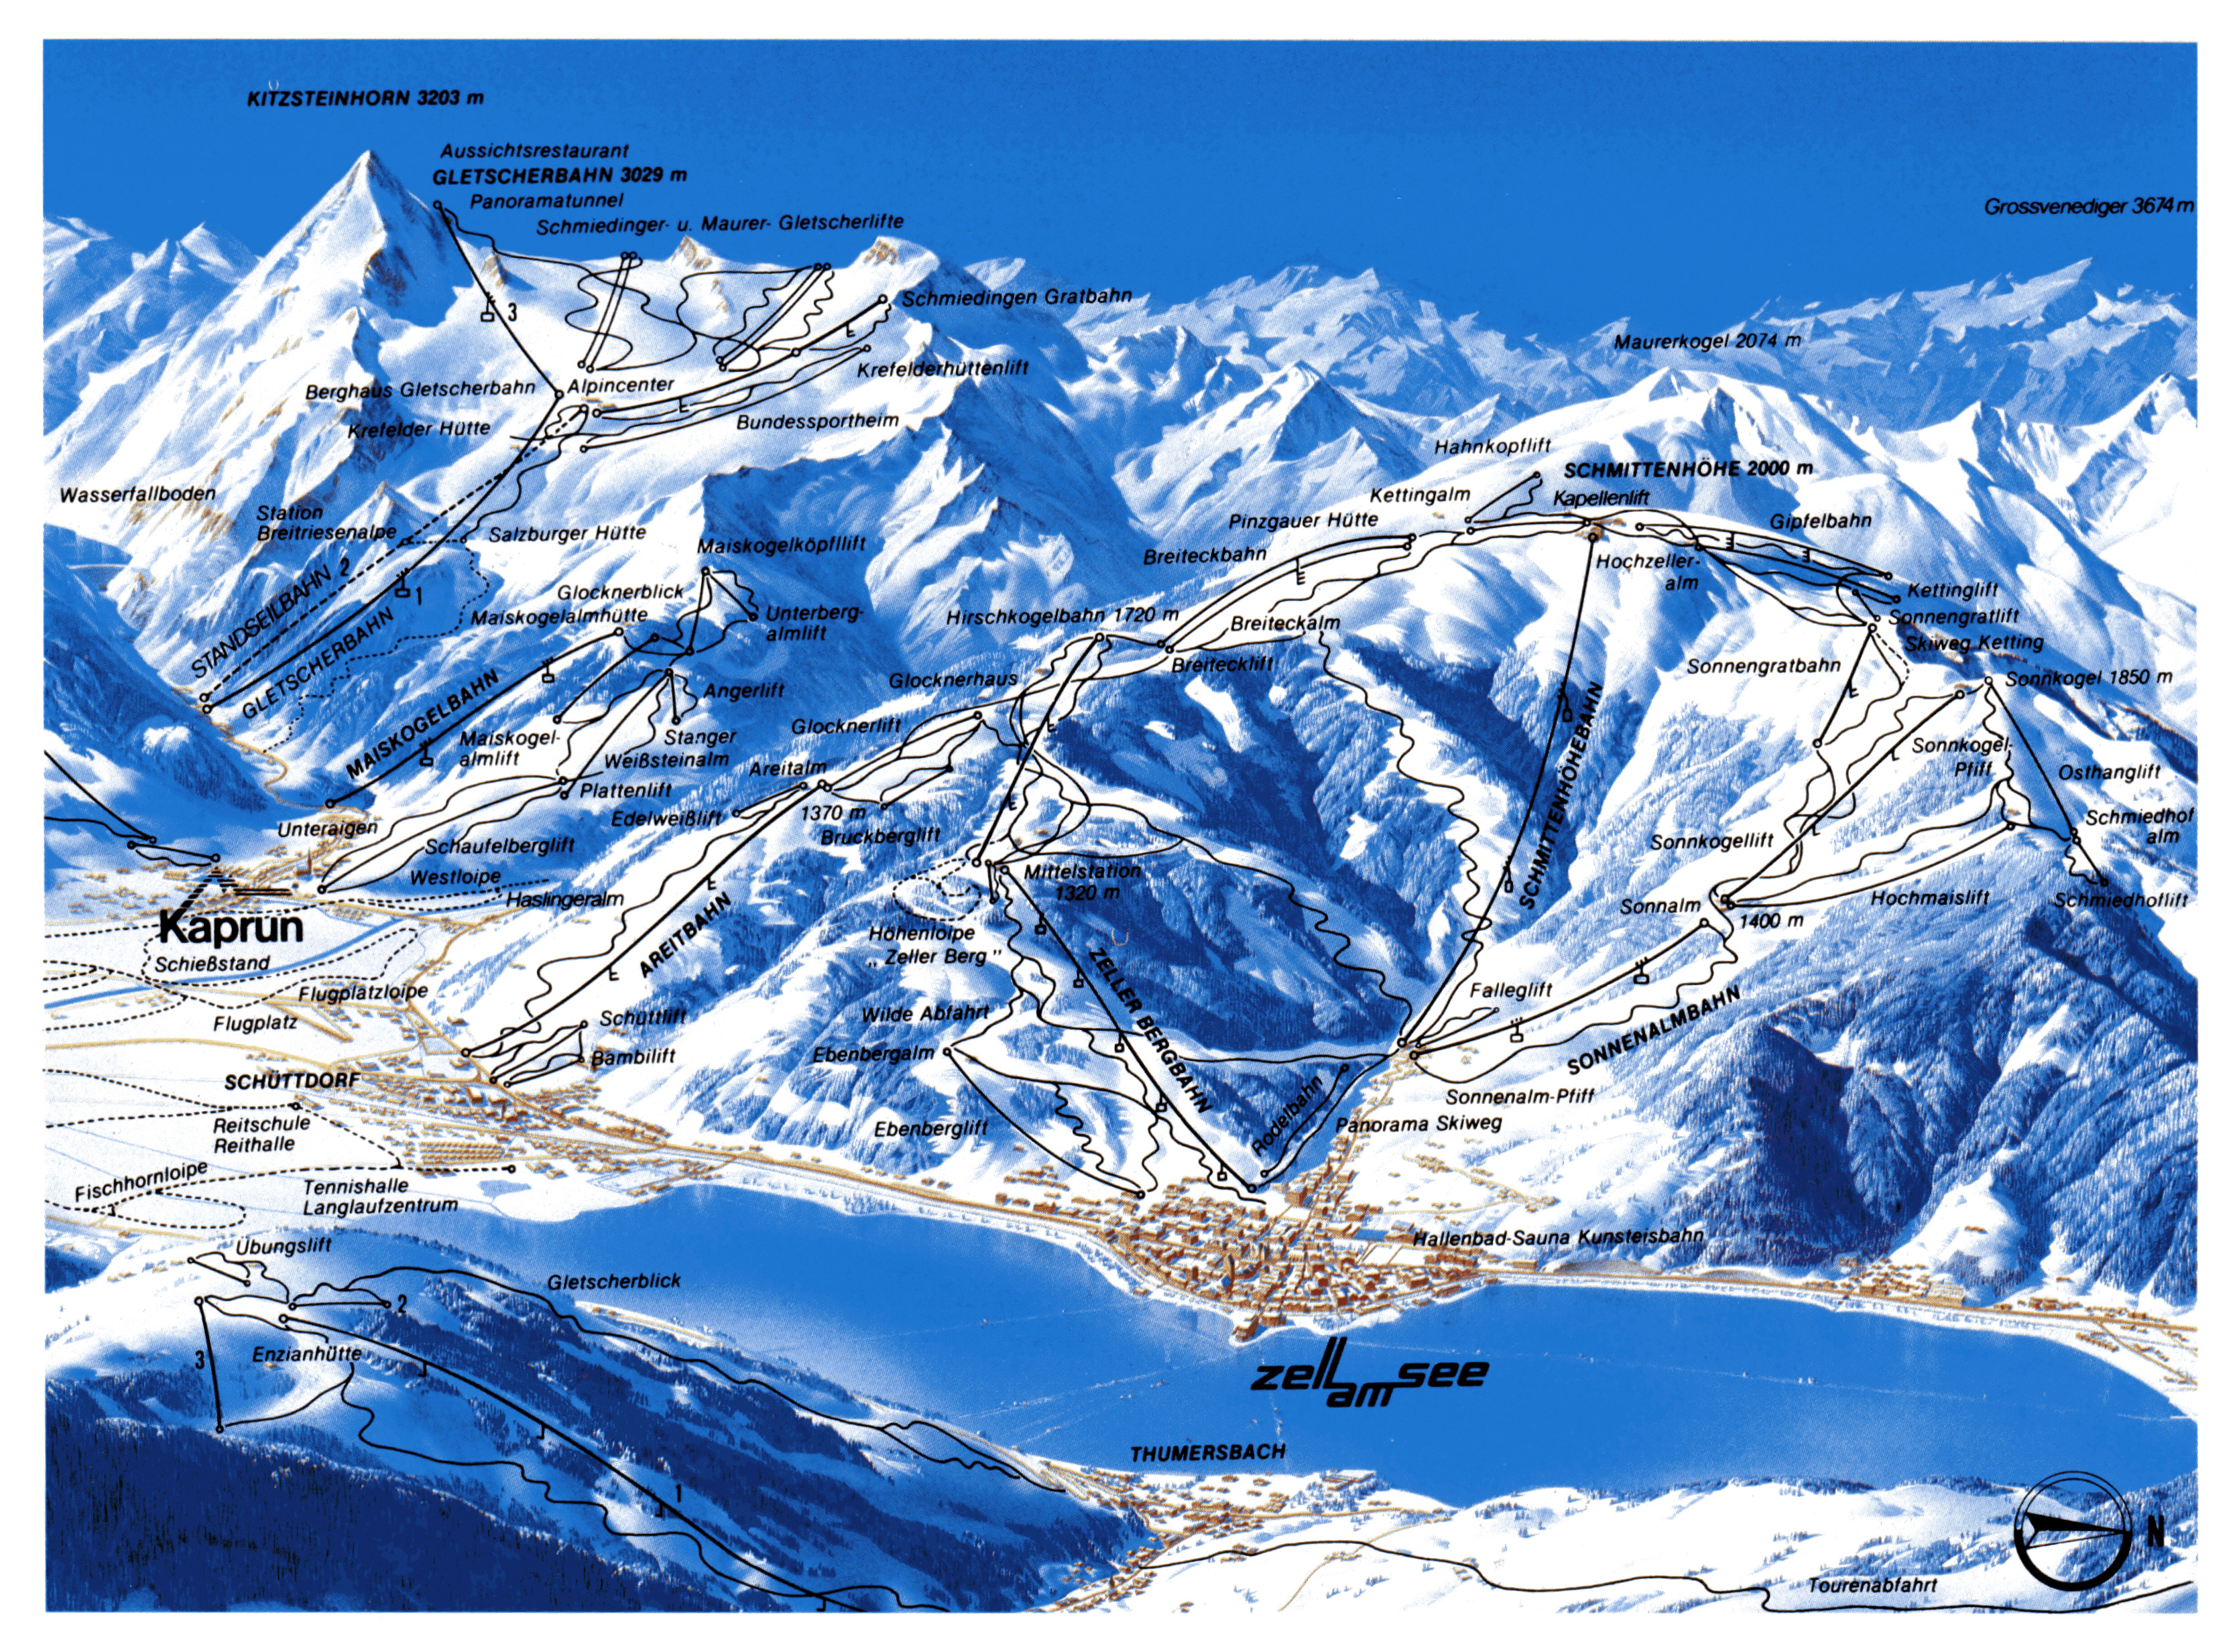 zell am see piste map Large Piste Map Of Kaprun And Zell Am See Ski Resorts 1983 zell am see piste map